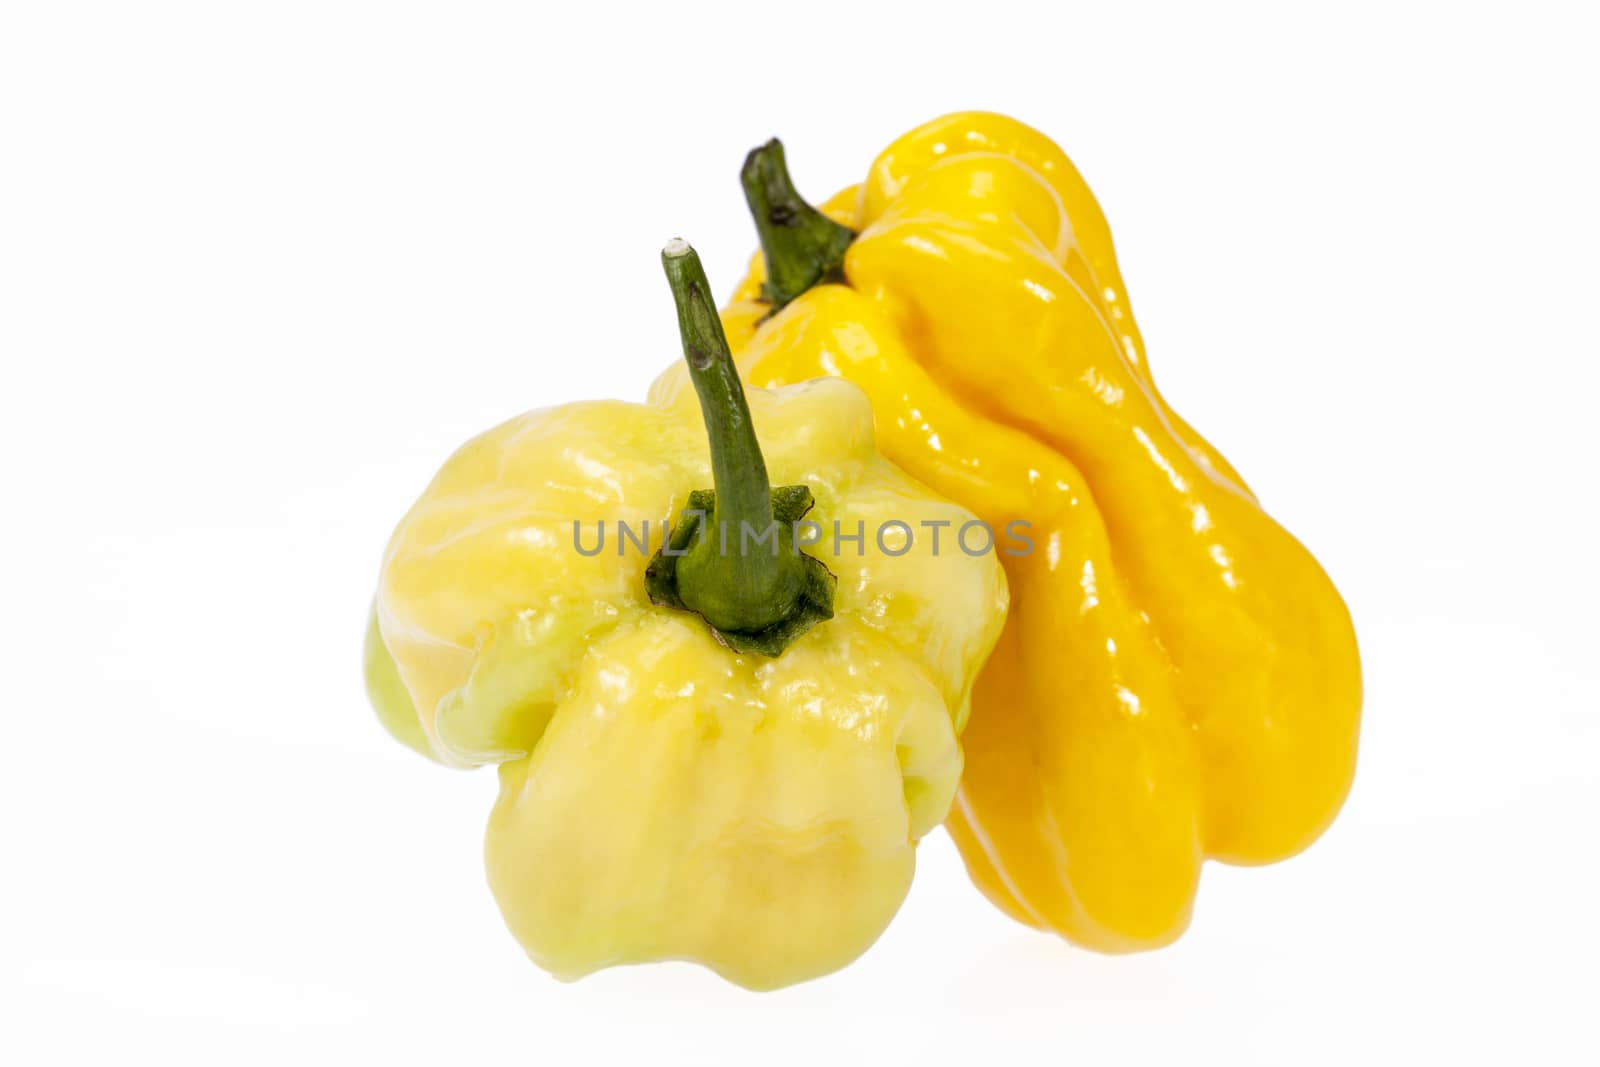 Vegetable of small yellow chili pepper habanero  on white background by mychadre77